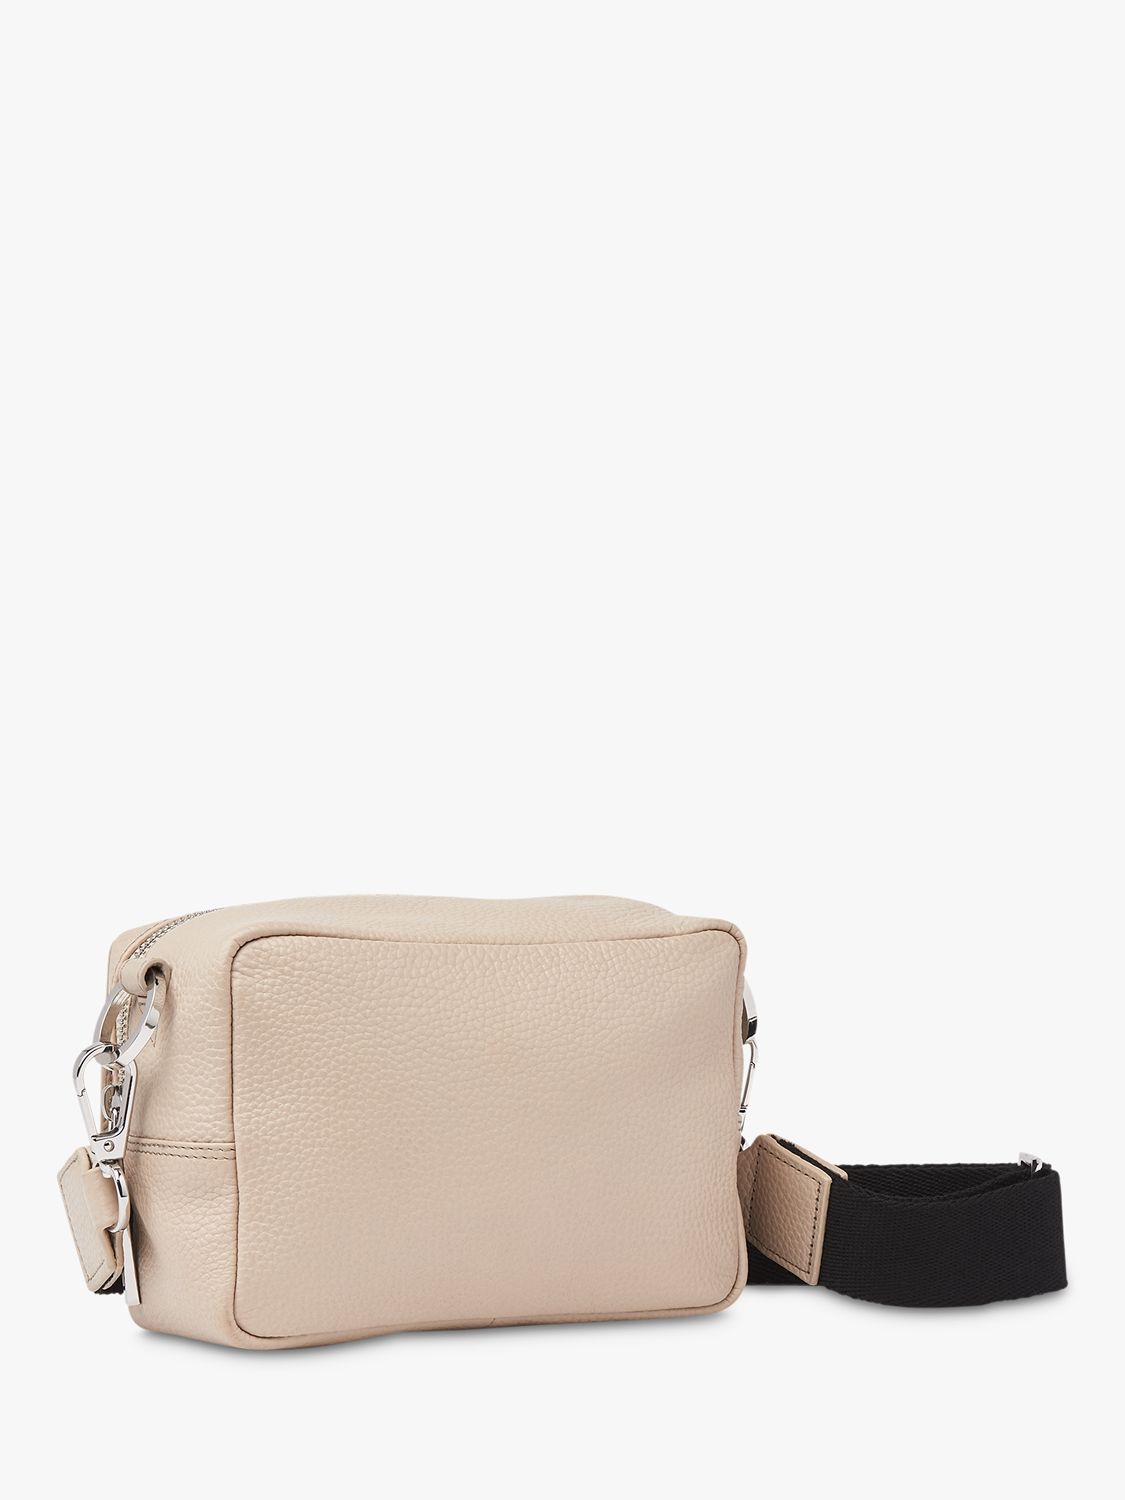 Whistles Bibi Leather Cross Body Bag, Soft Taupe, One Size